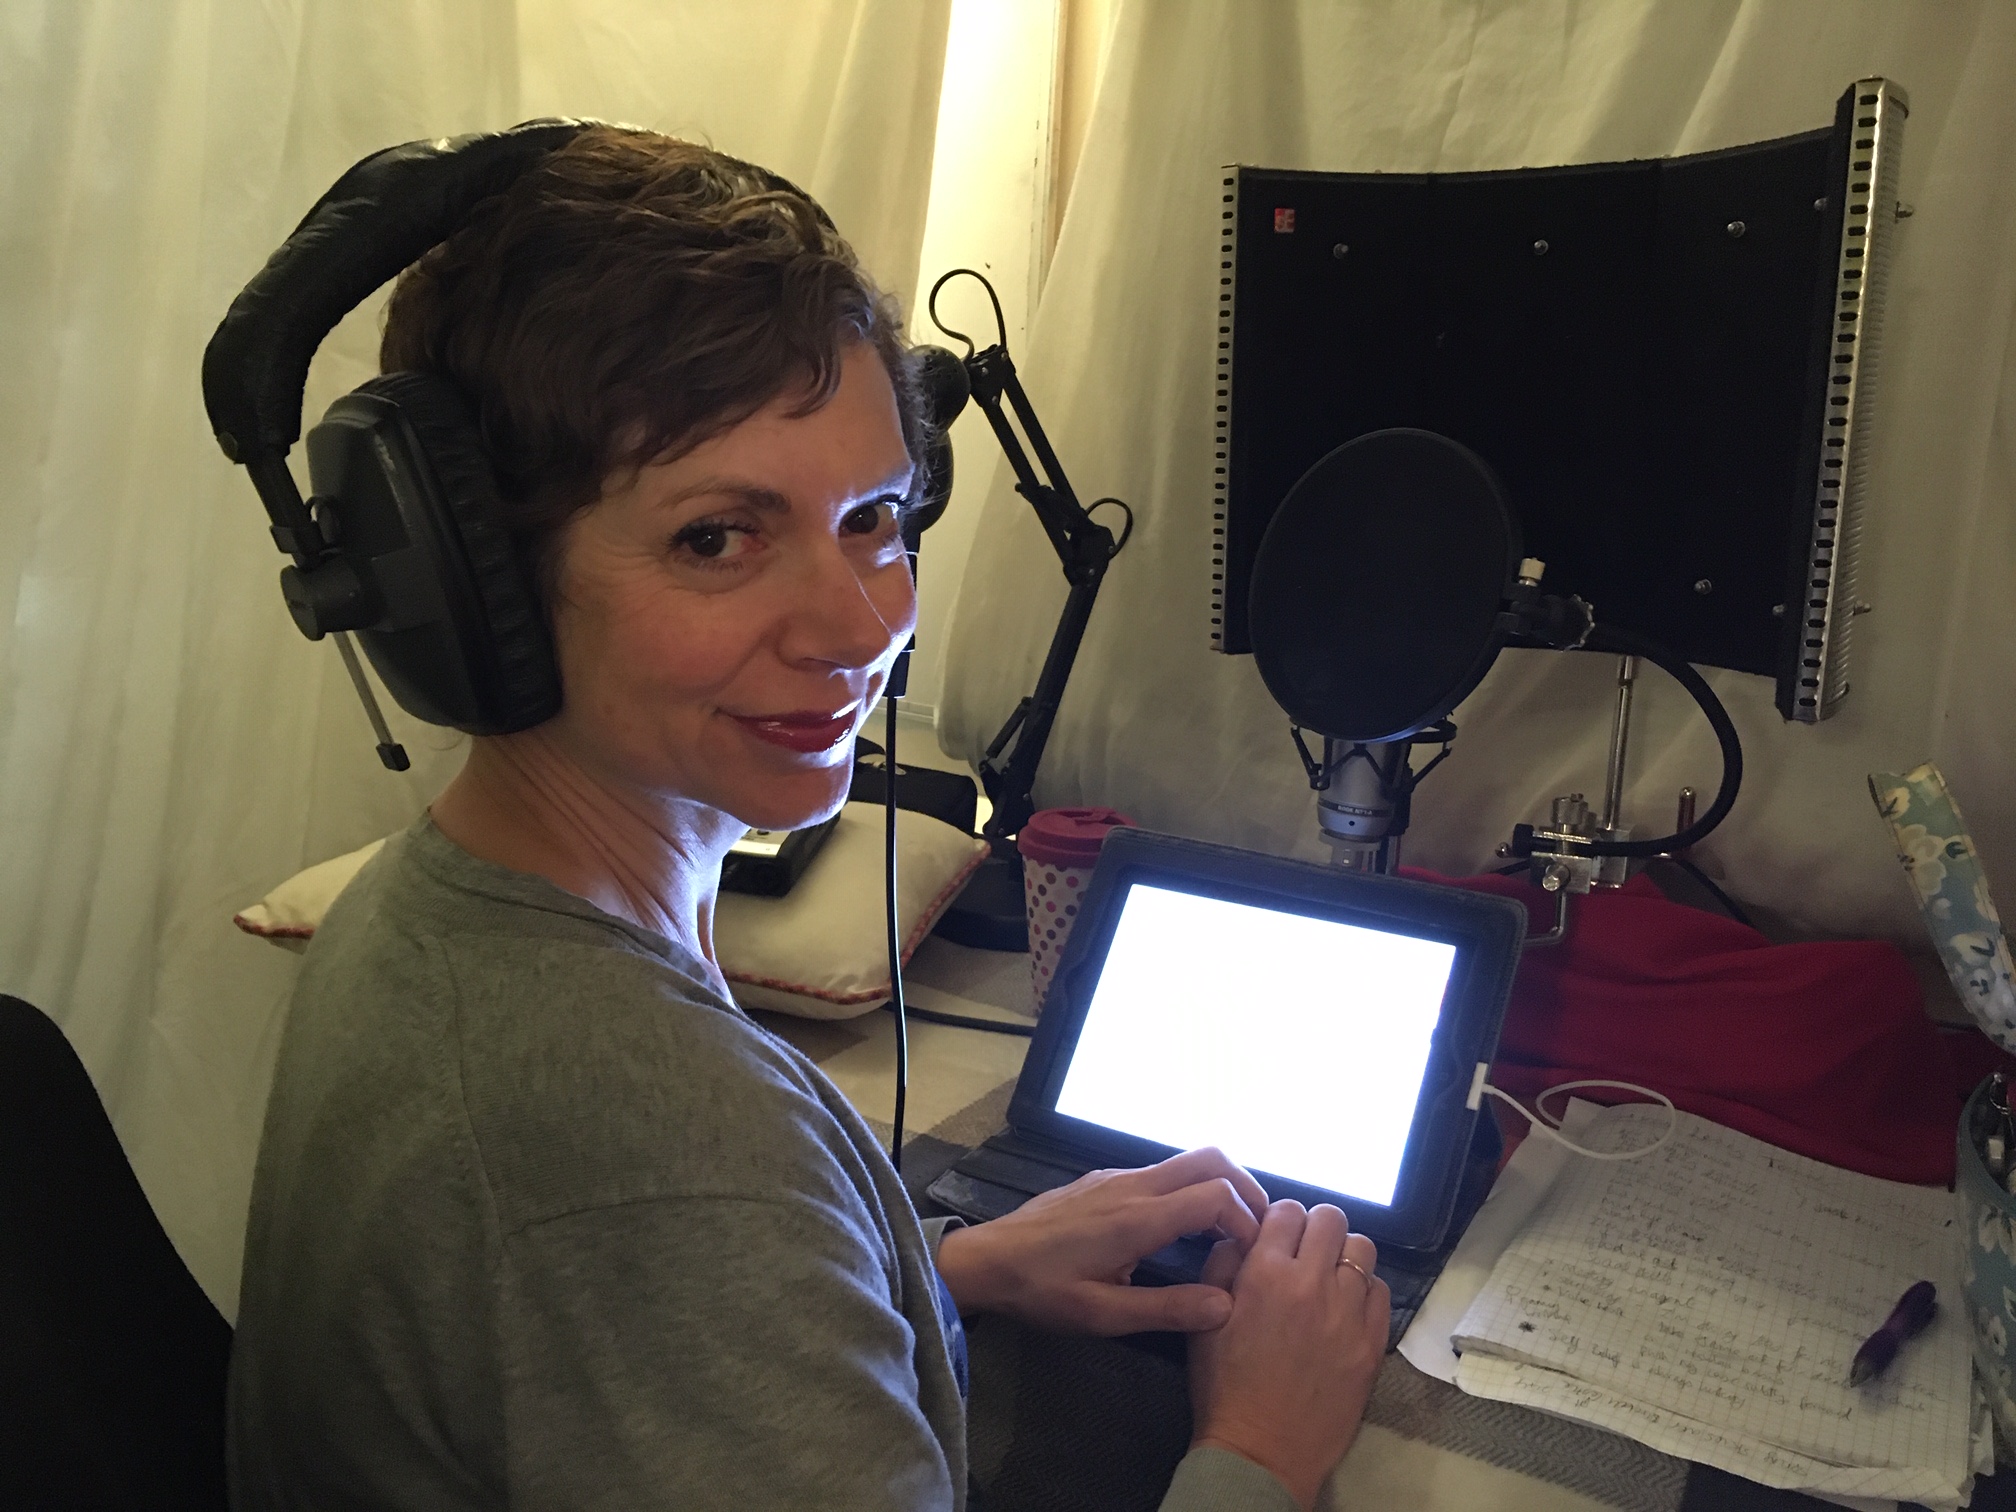 Rachel Bavidge is a mother of two who has voiced scores of audiobooks in 20 years as a voice actor, including Ladybird Classics: The Complete Audio Collection